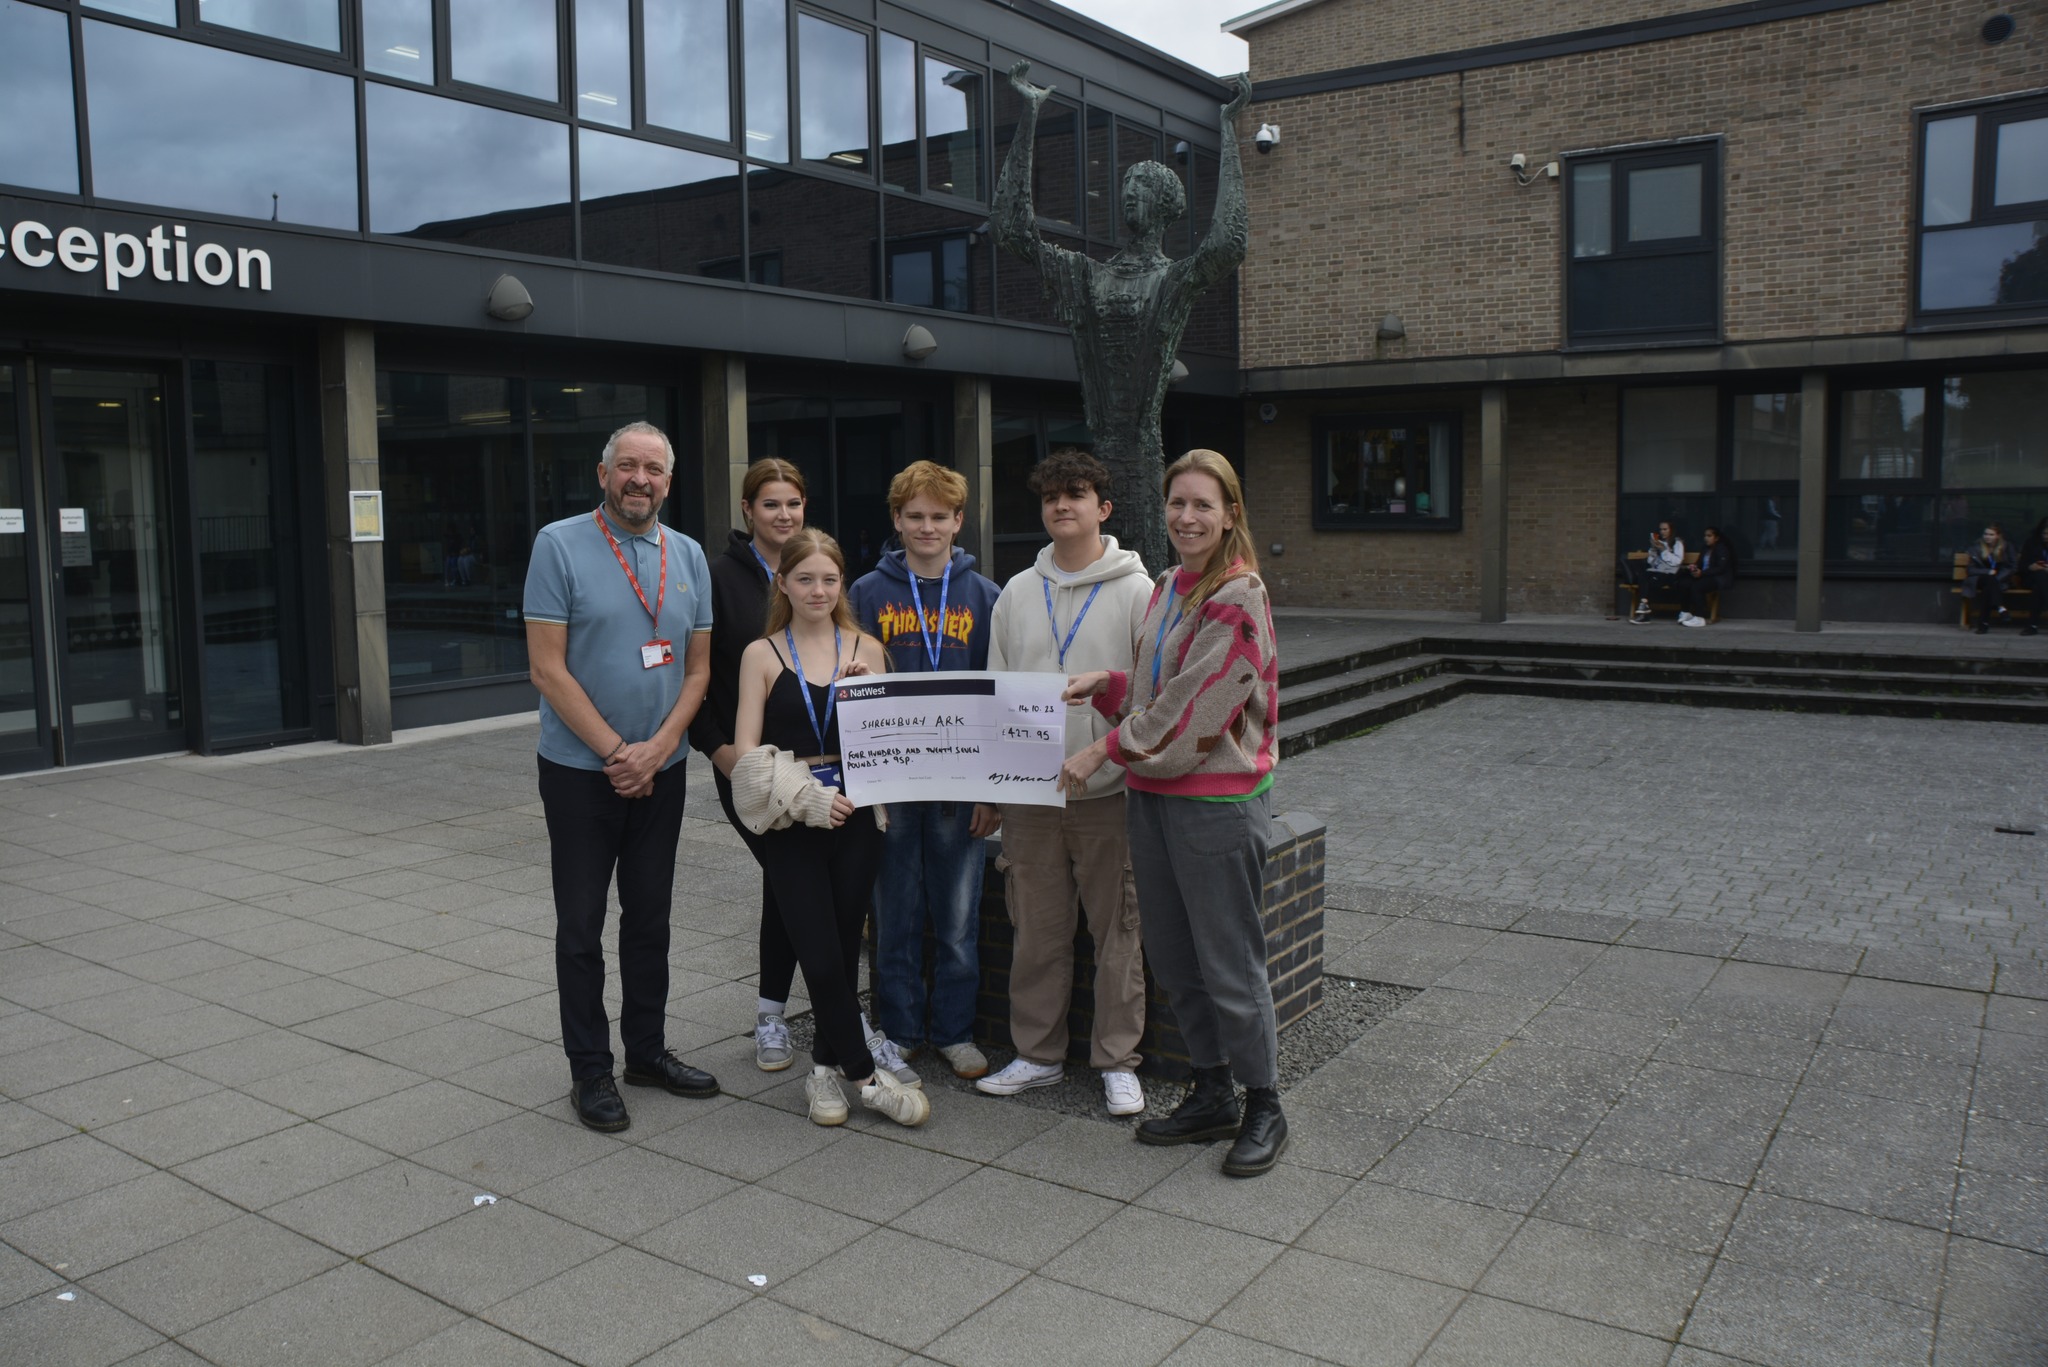 Business Students pose with cheque